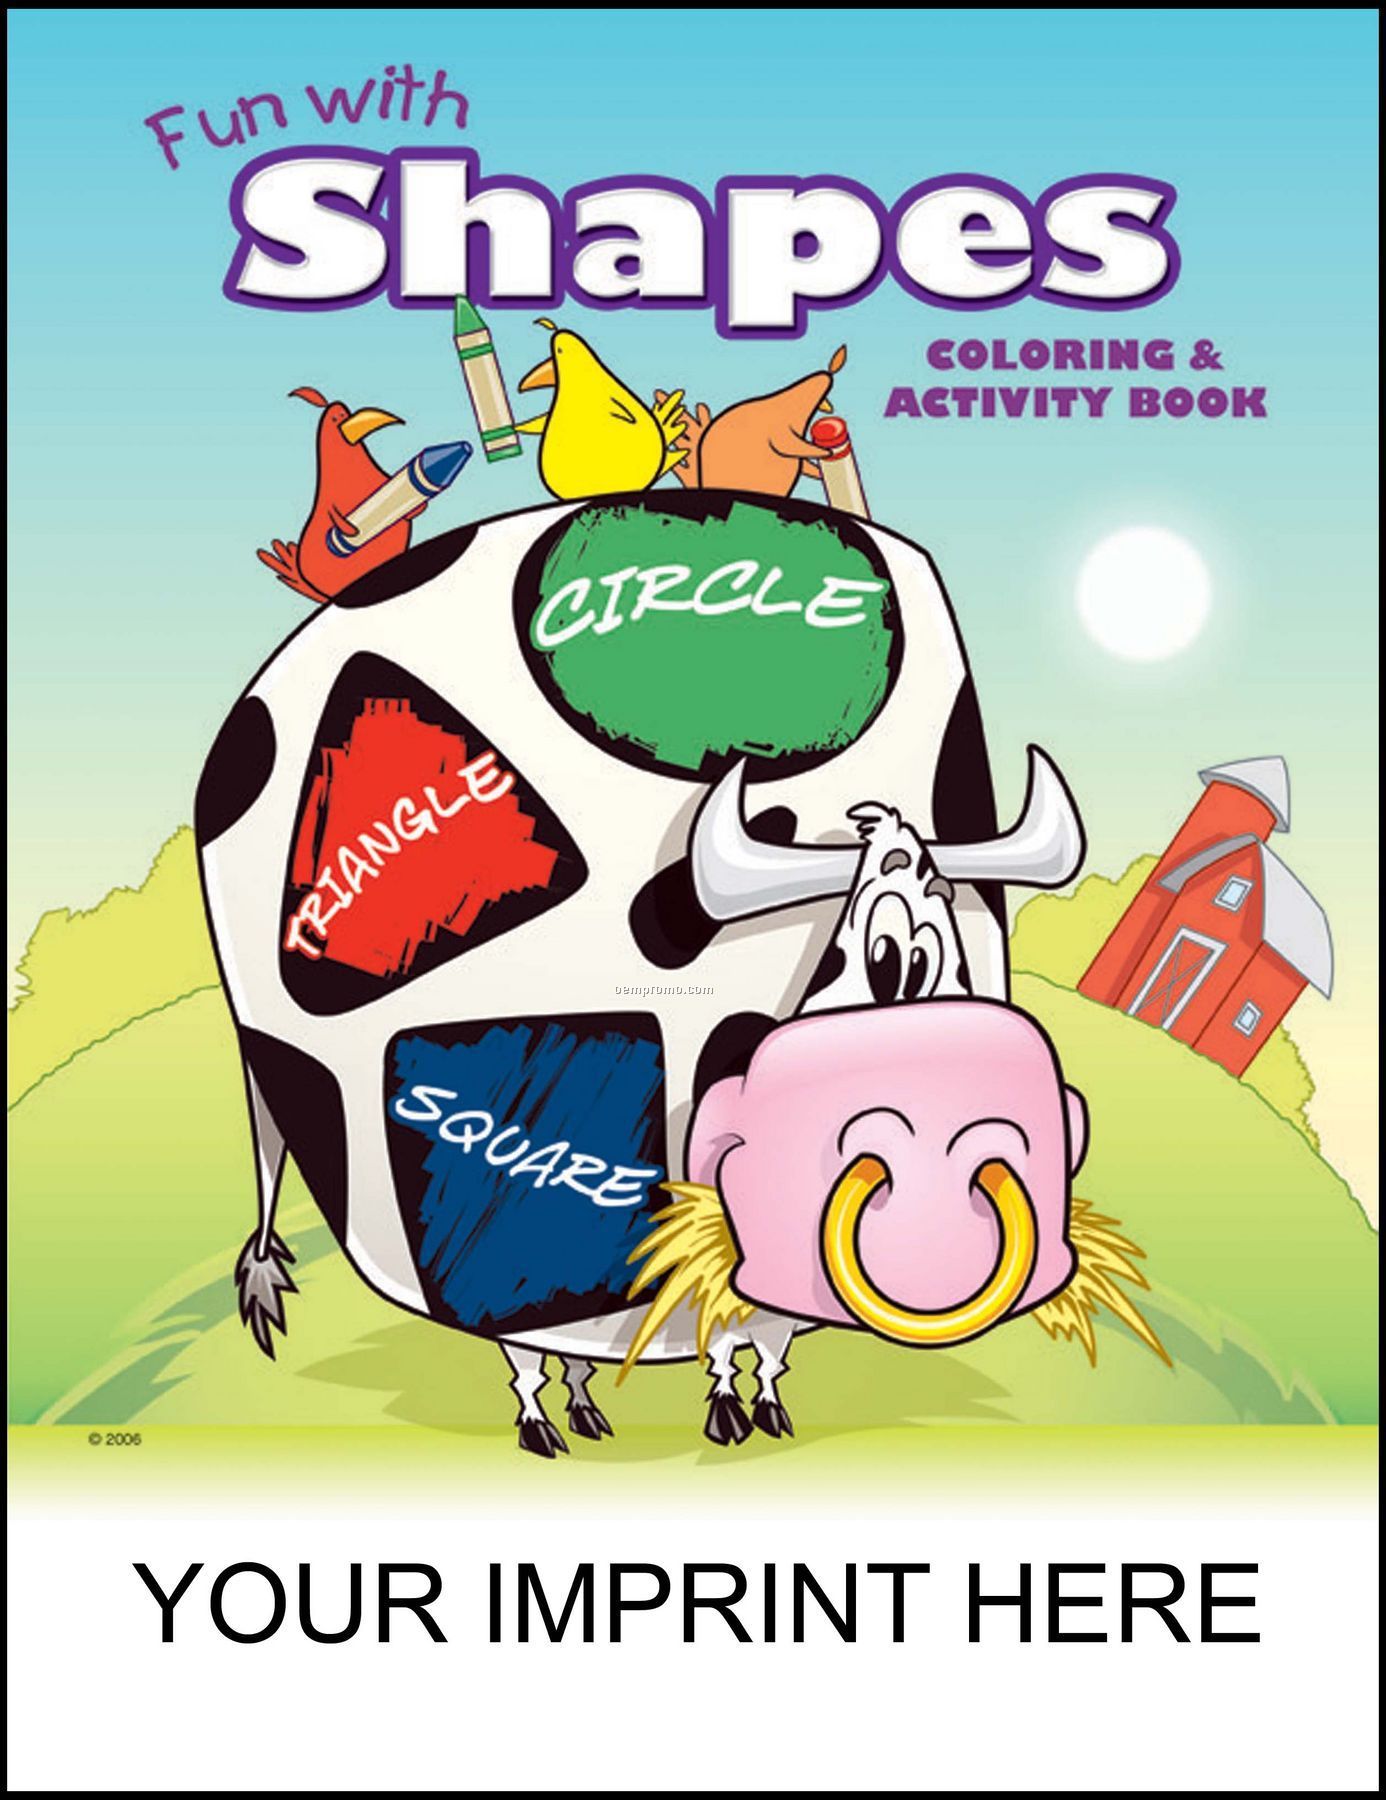 Fun With Shapes Coloring & Activity Book